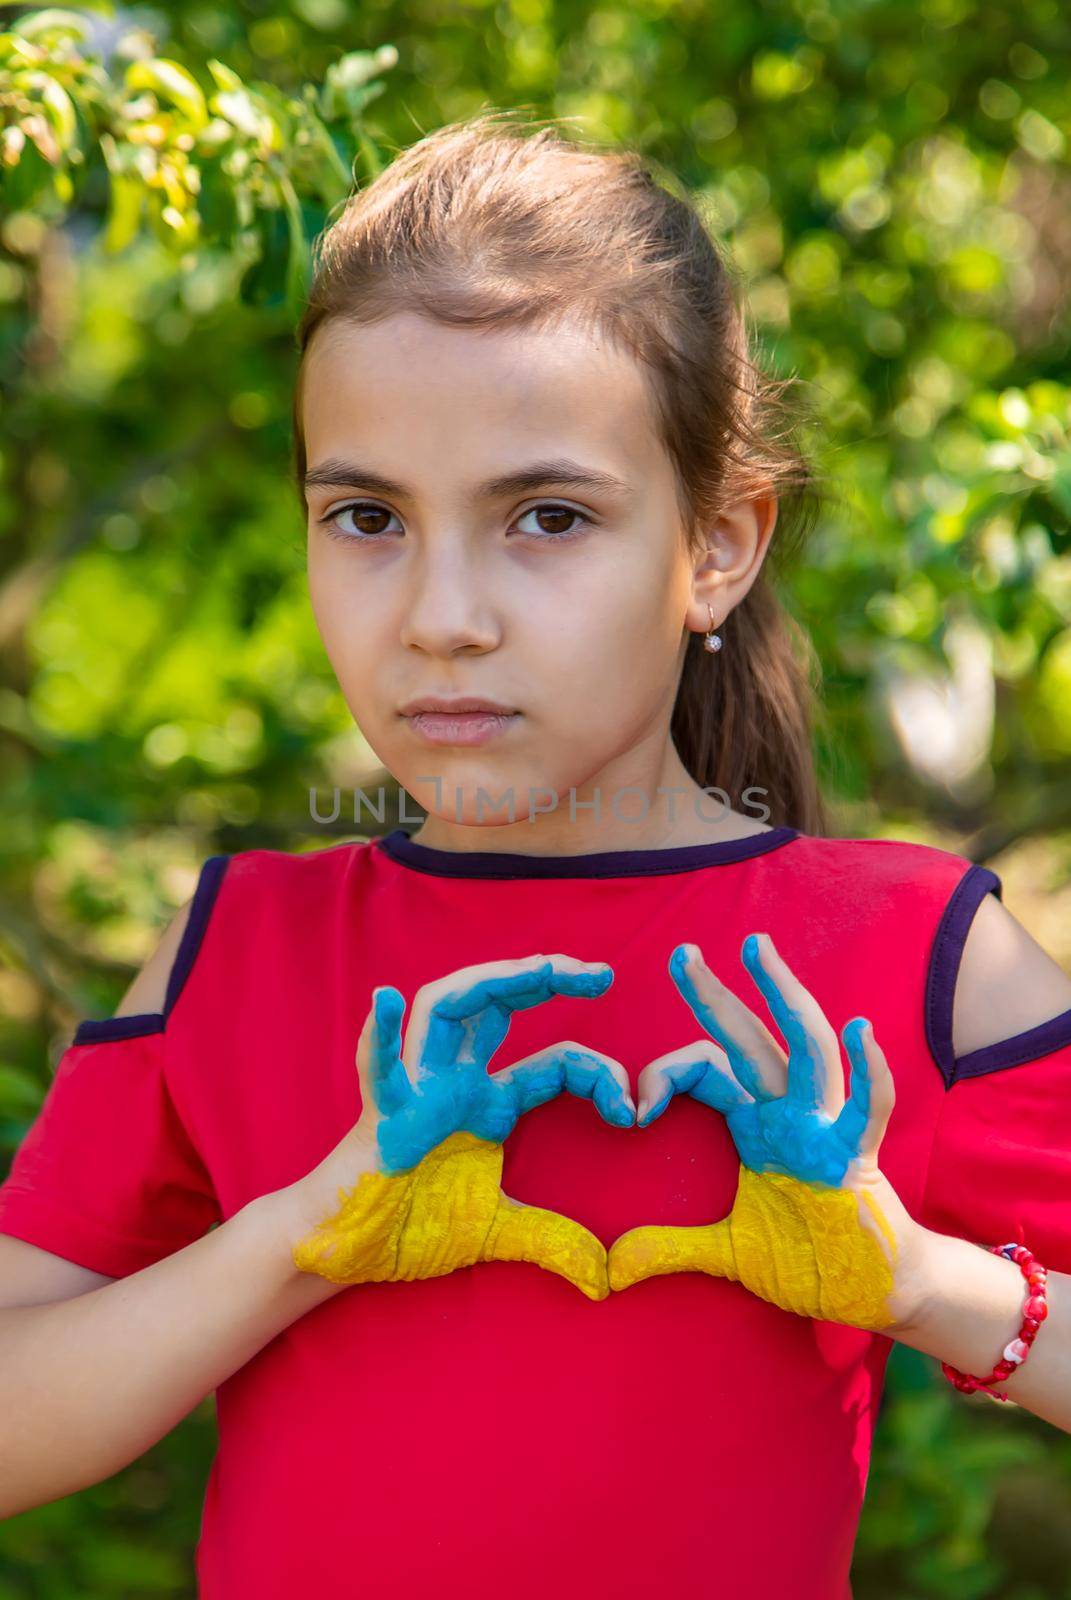 A child with the flag of Ukraine painted on his hands. Selective focus. Kid.